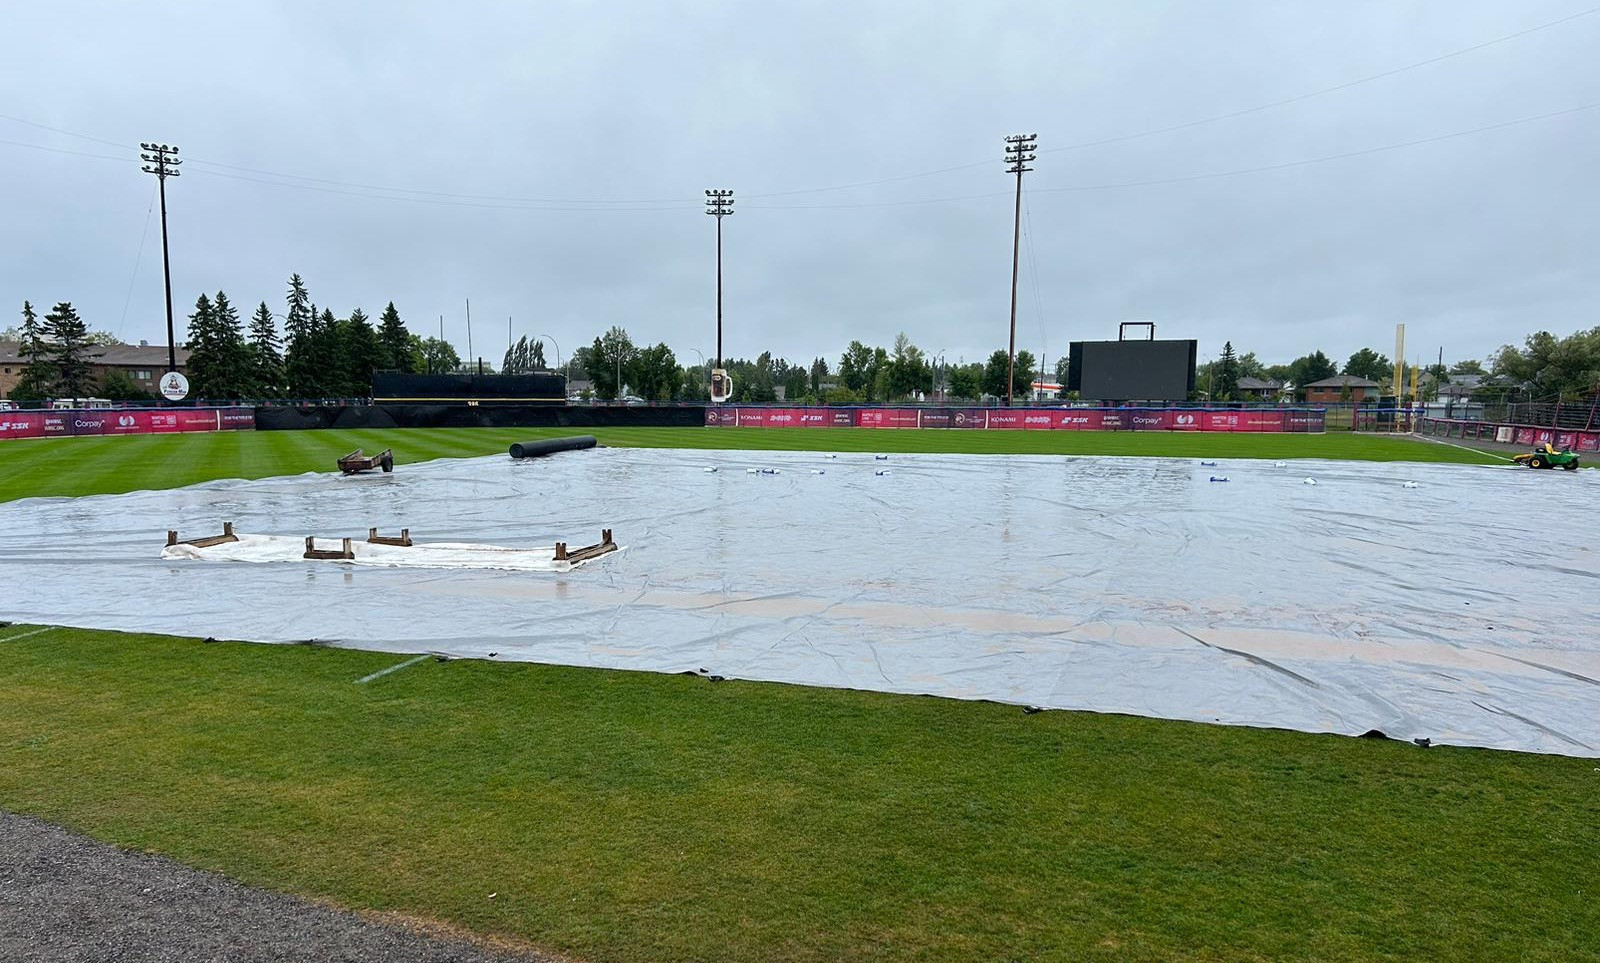 Women's Baseball World Cup Group A matches postponed due to persistent rain